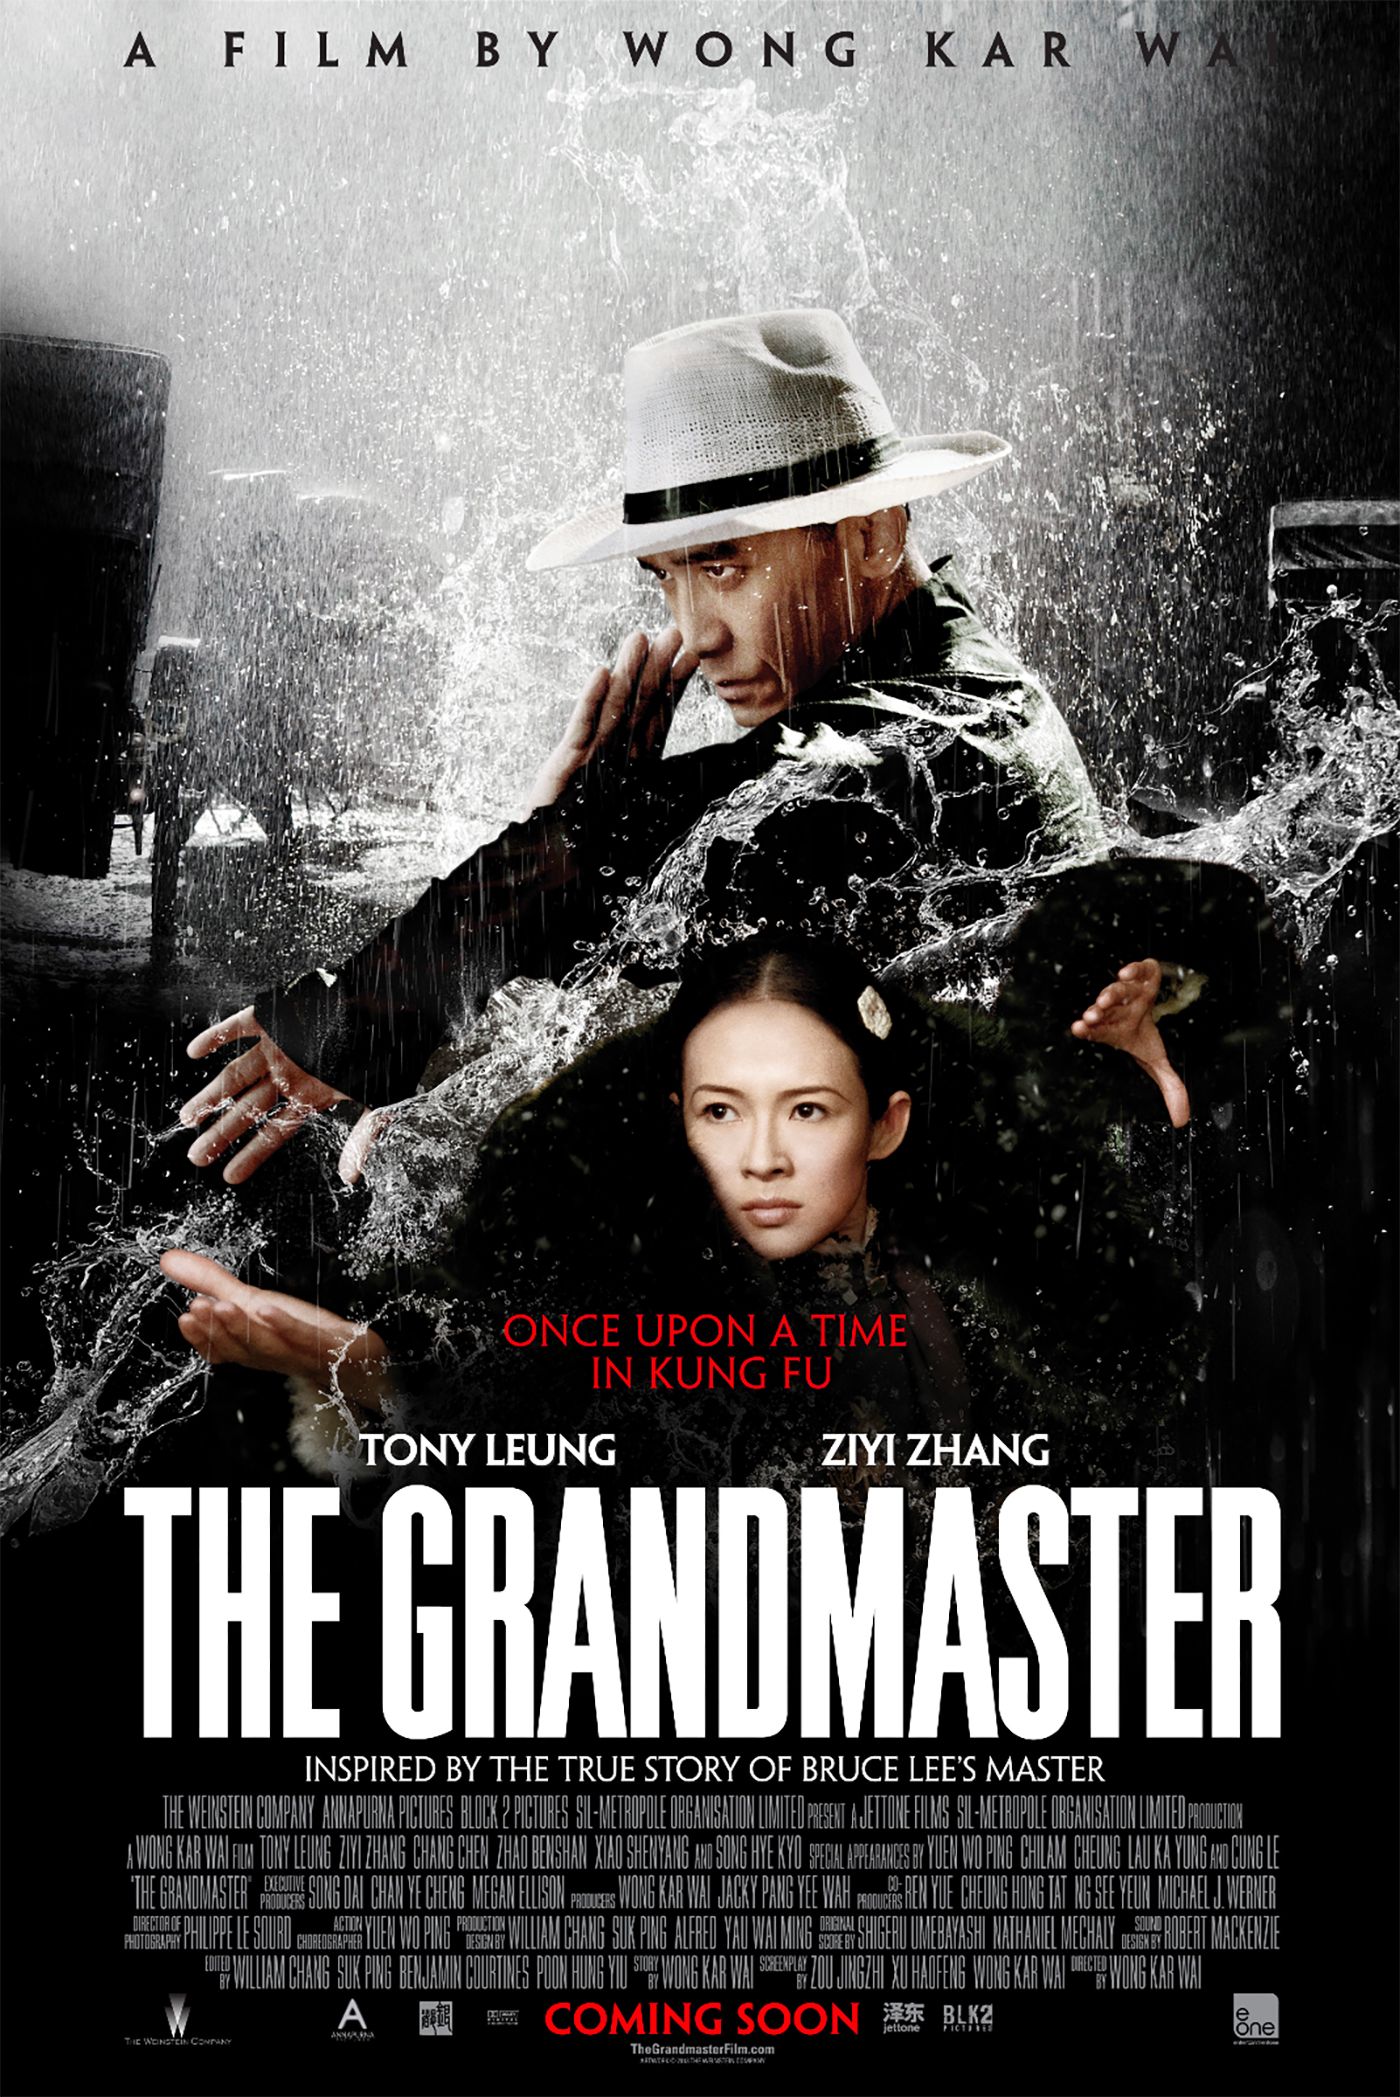 Tony Leung and Zhang Ziyi in the poster for The Grandmaster